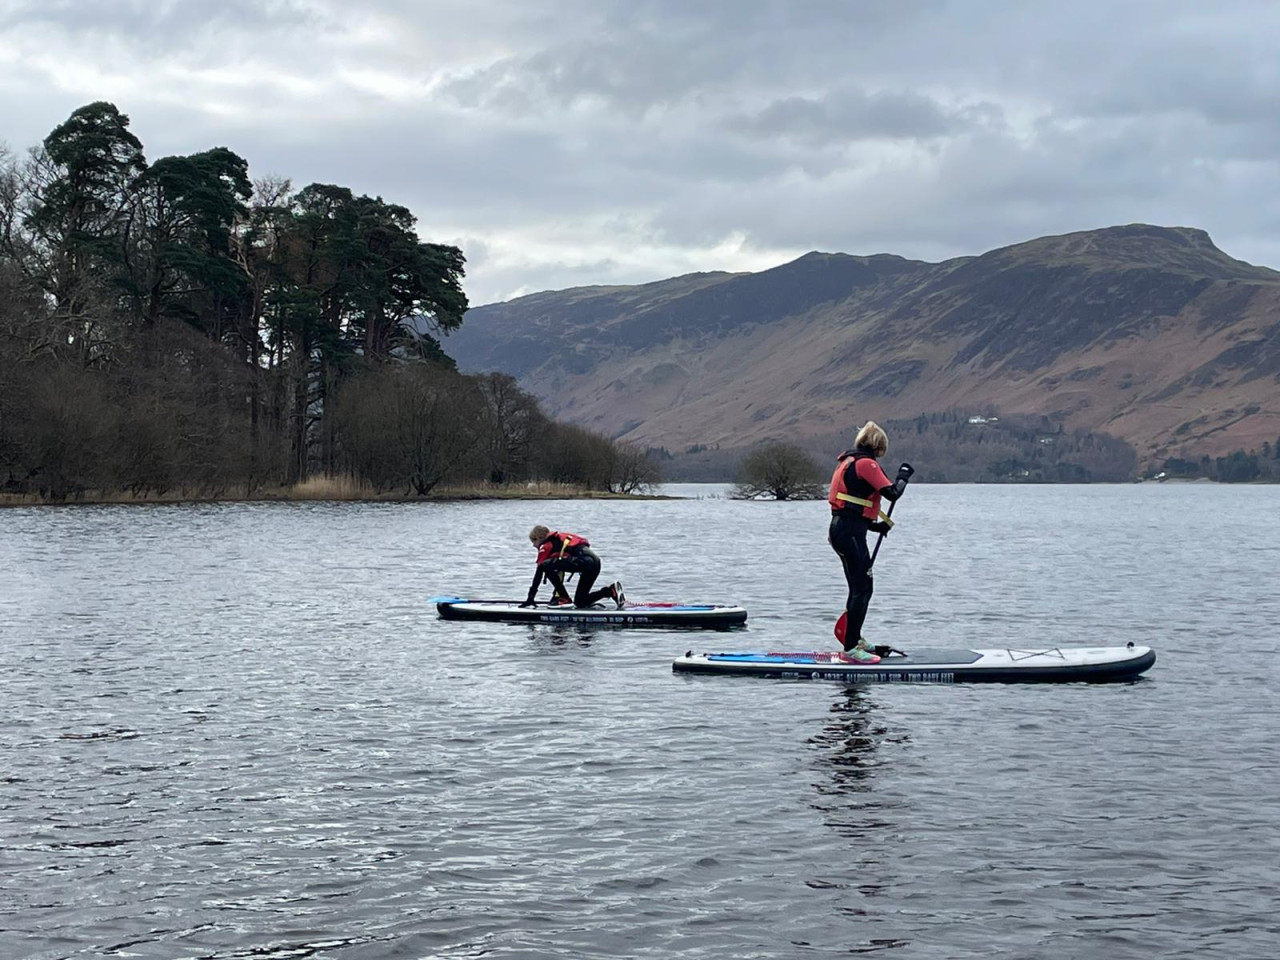 Two people paddleboarding on Derwentwater